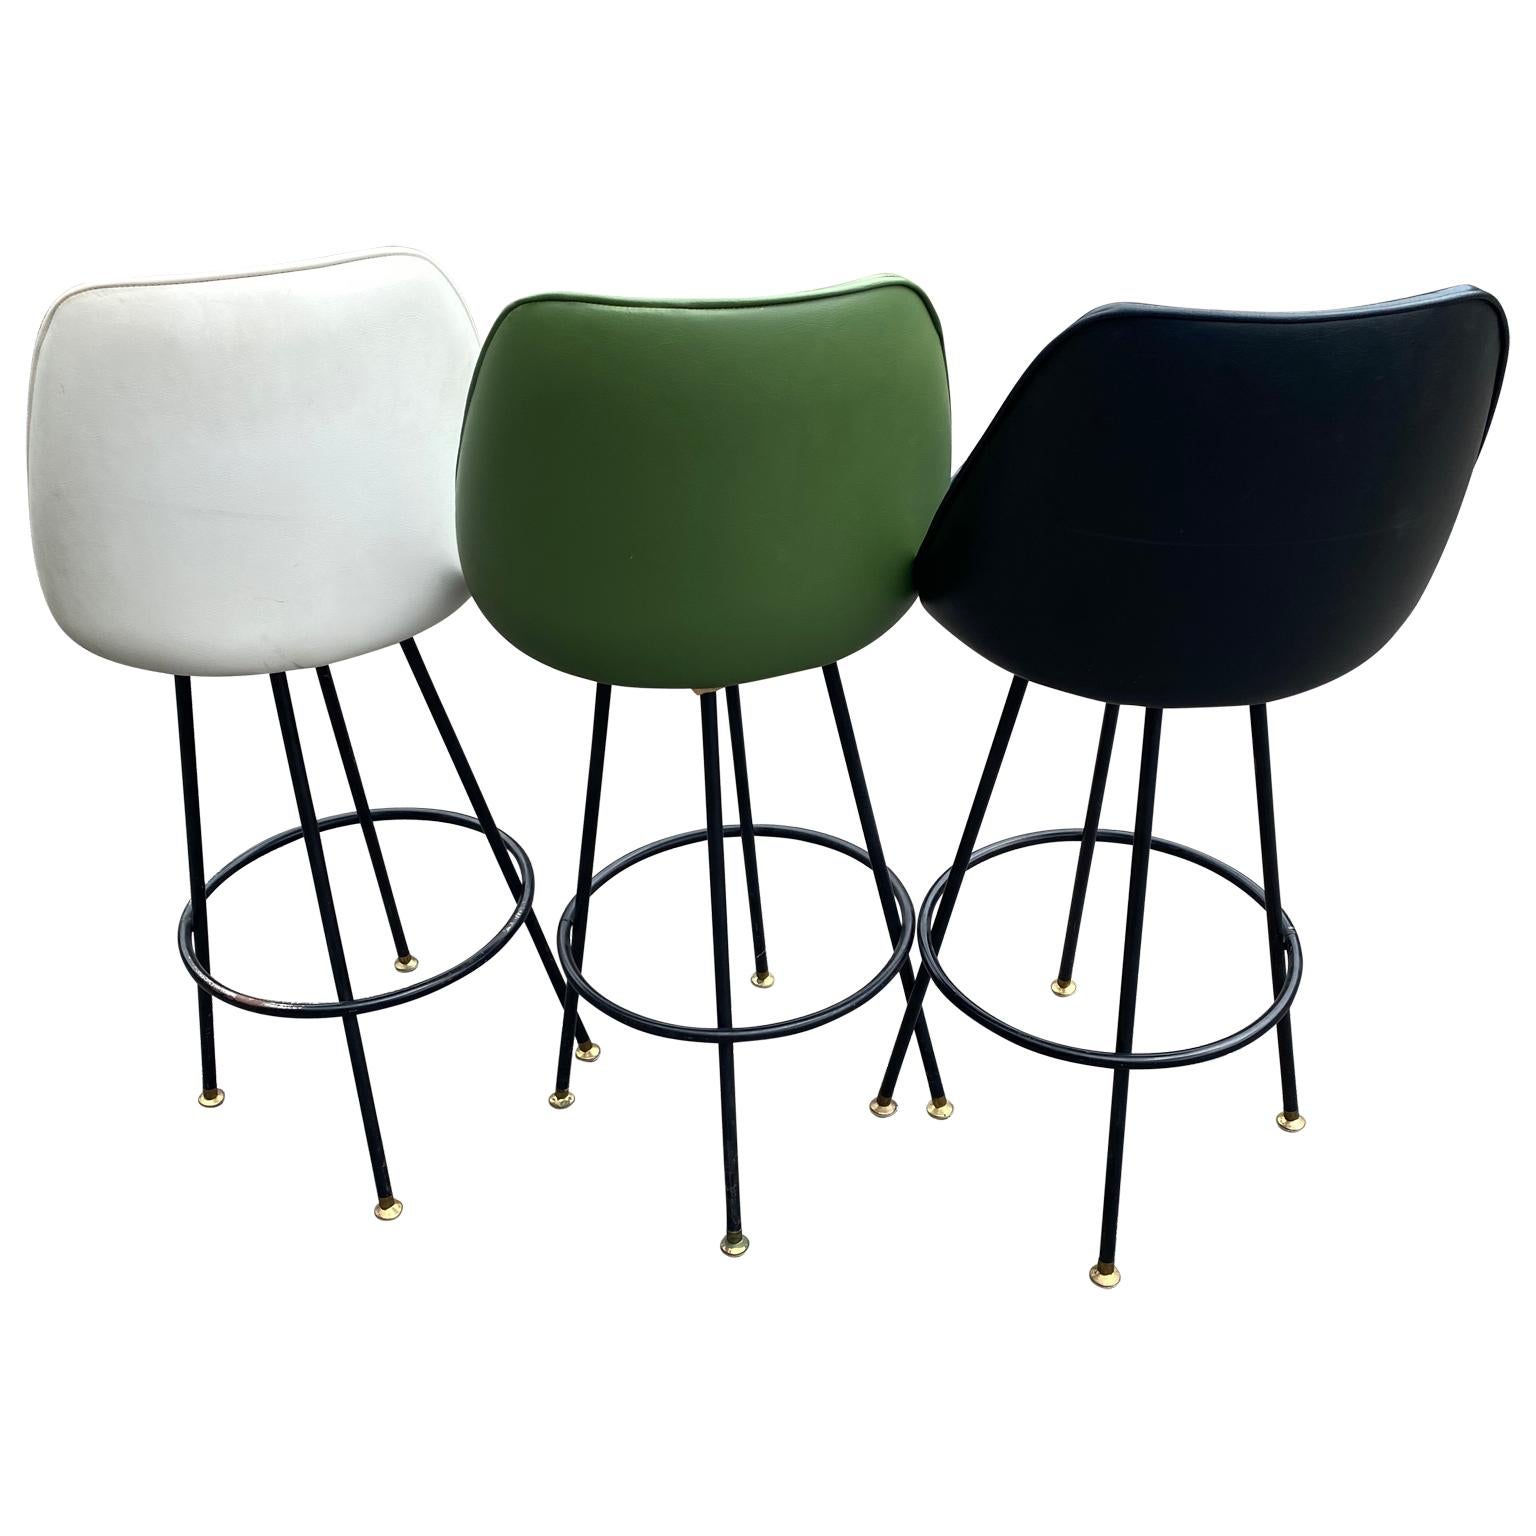 Hand-Crafted Three Mid-Century Modern High-Back Swivel Black, White And Green Barstools